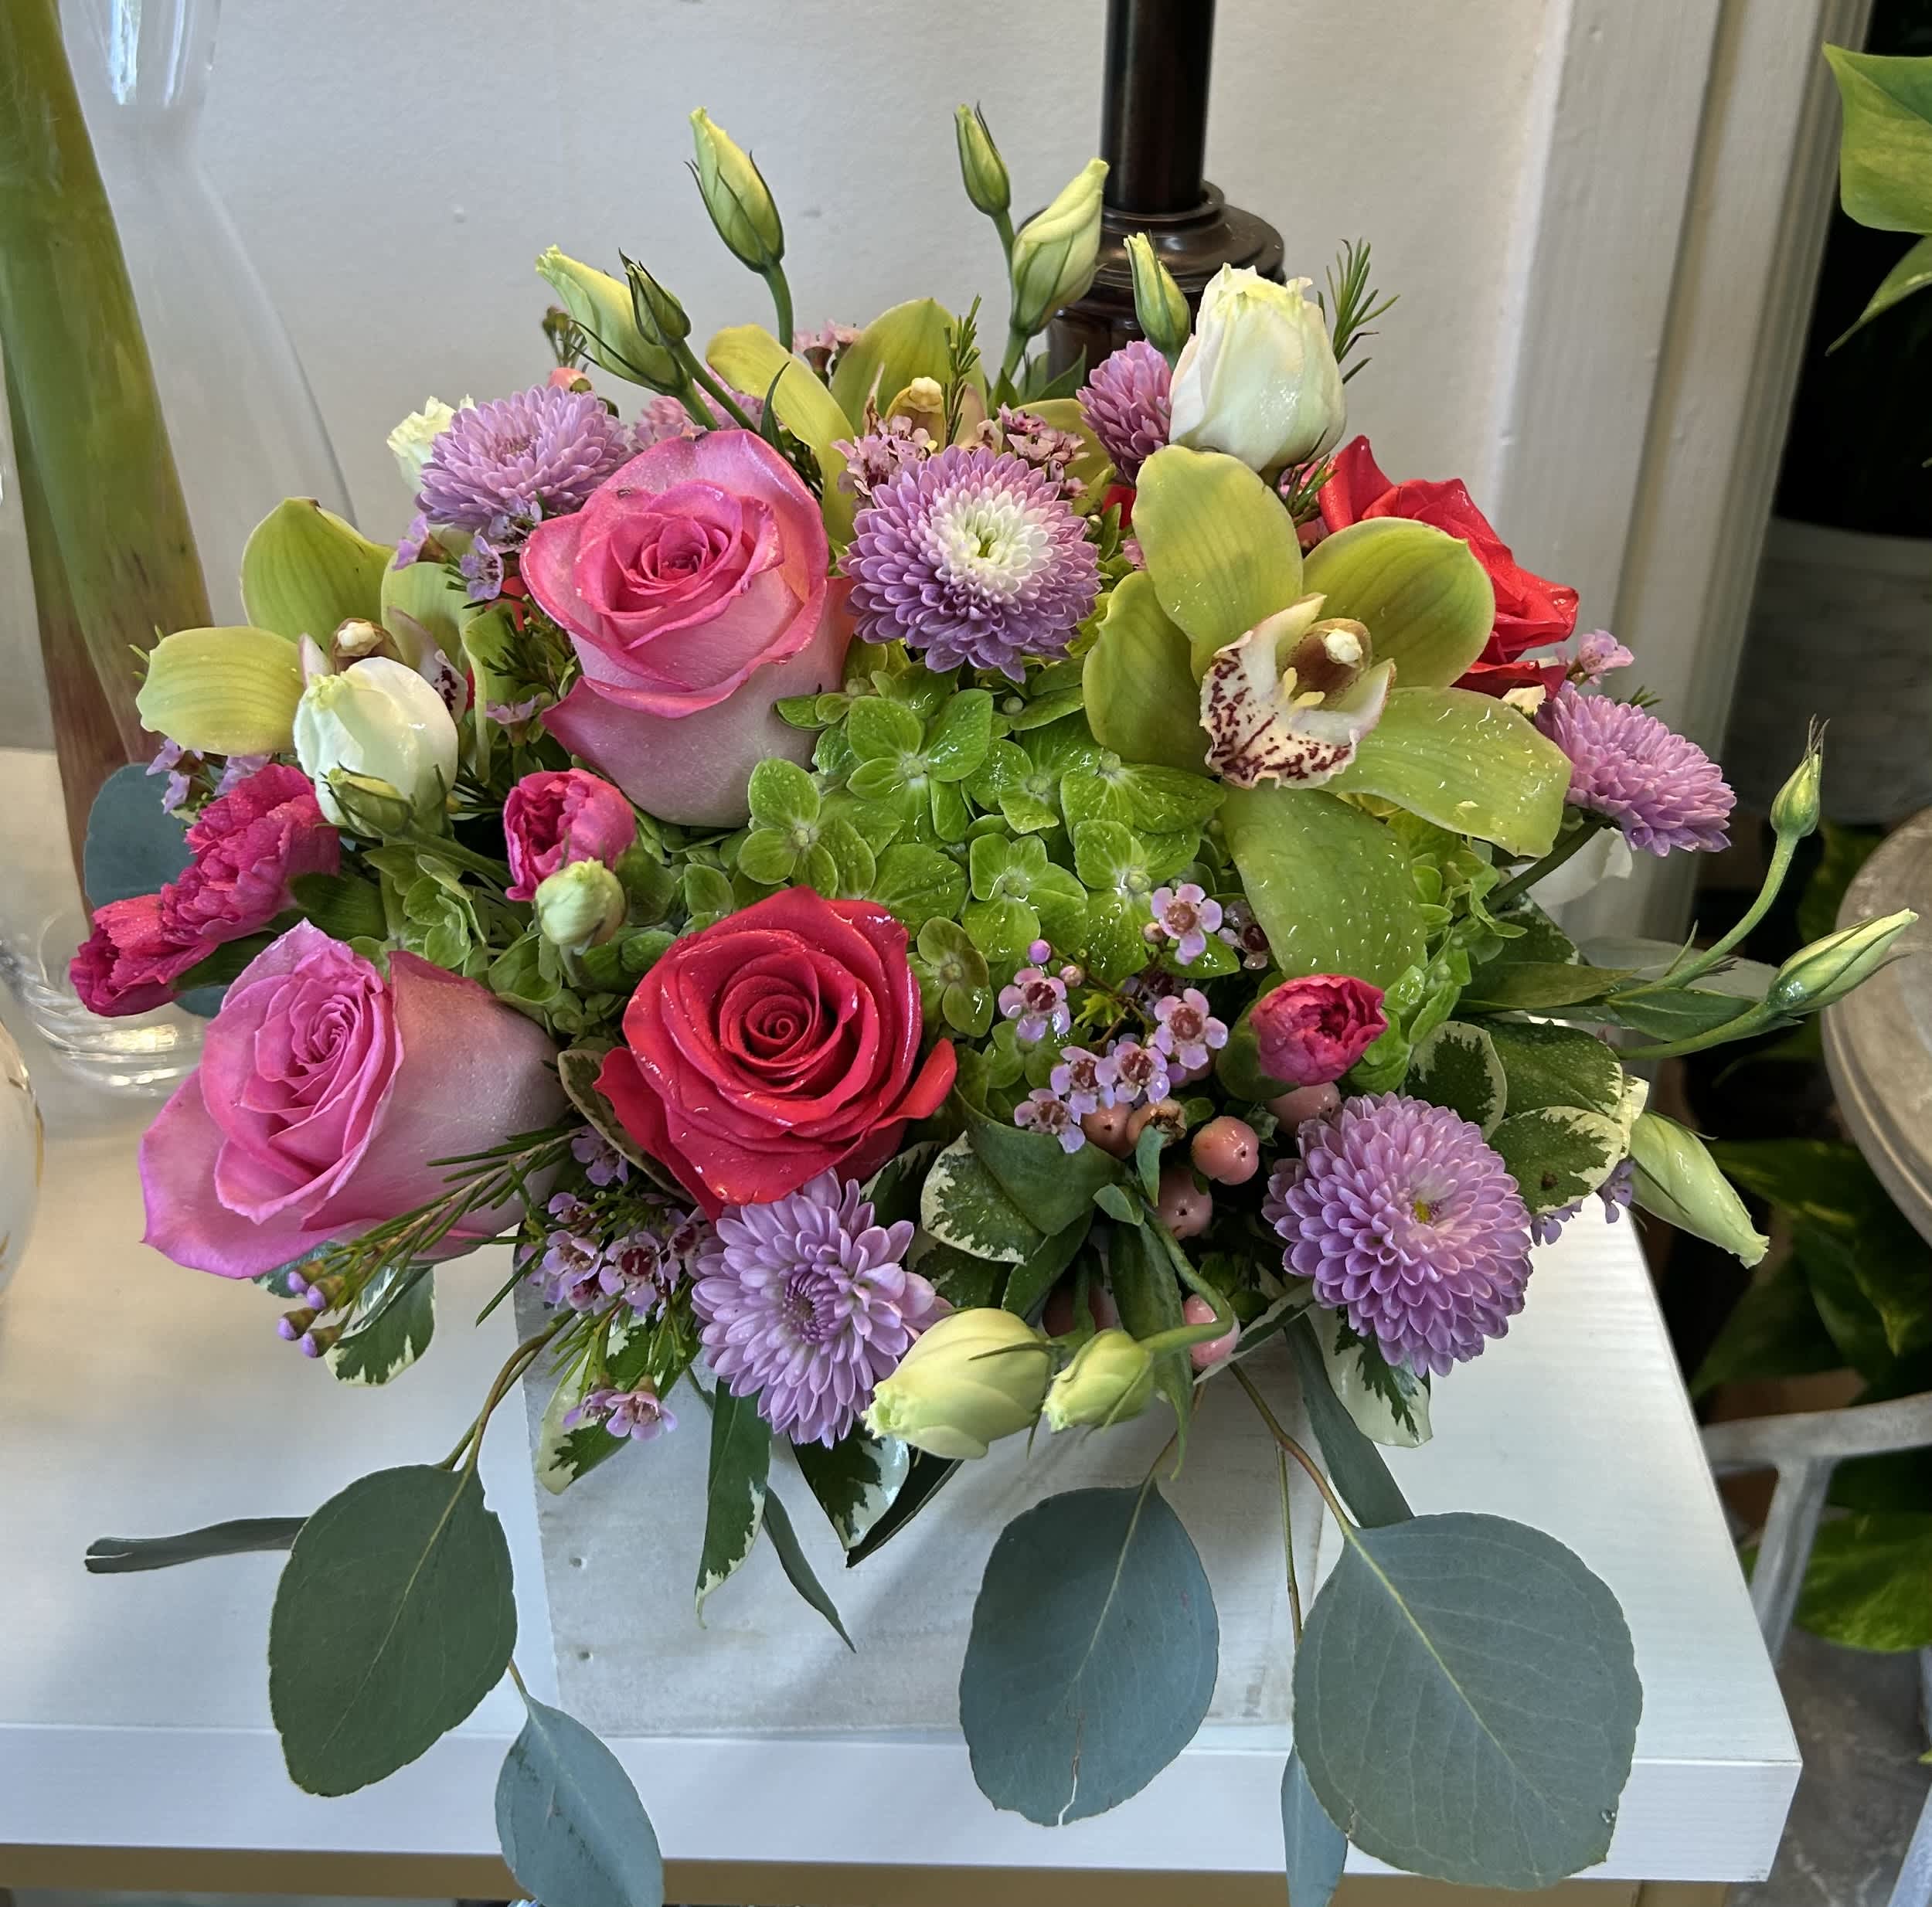 Orchid garden bouquet - Orchids roses and hydrangeas